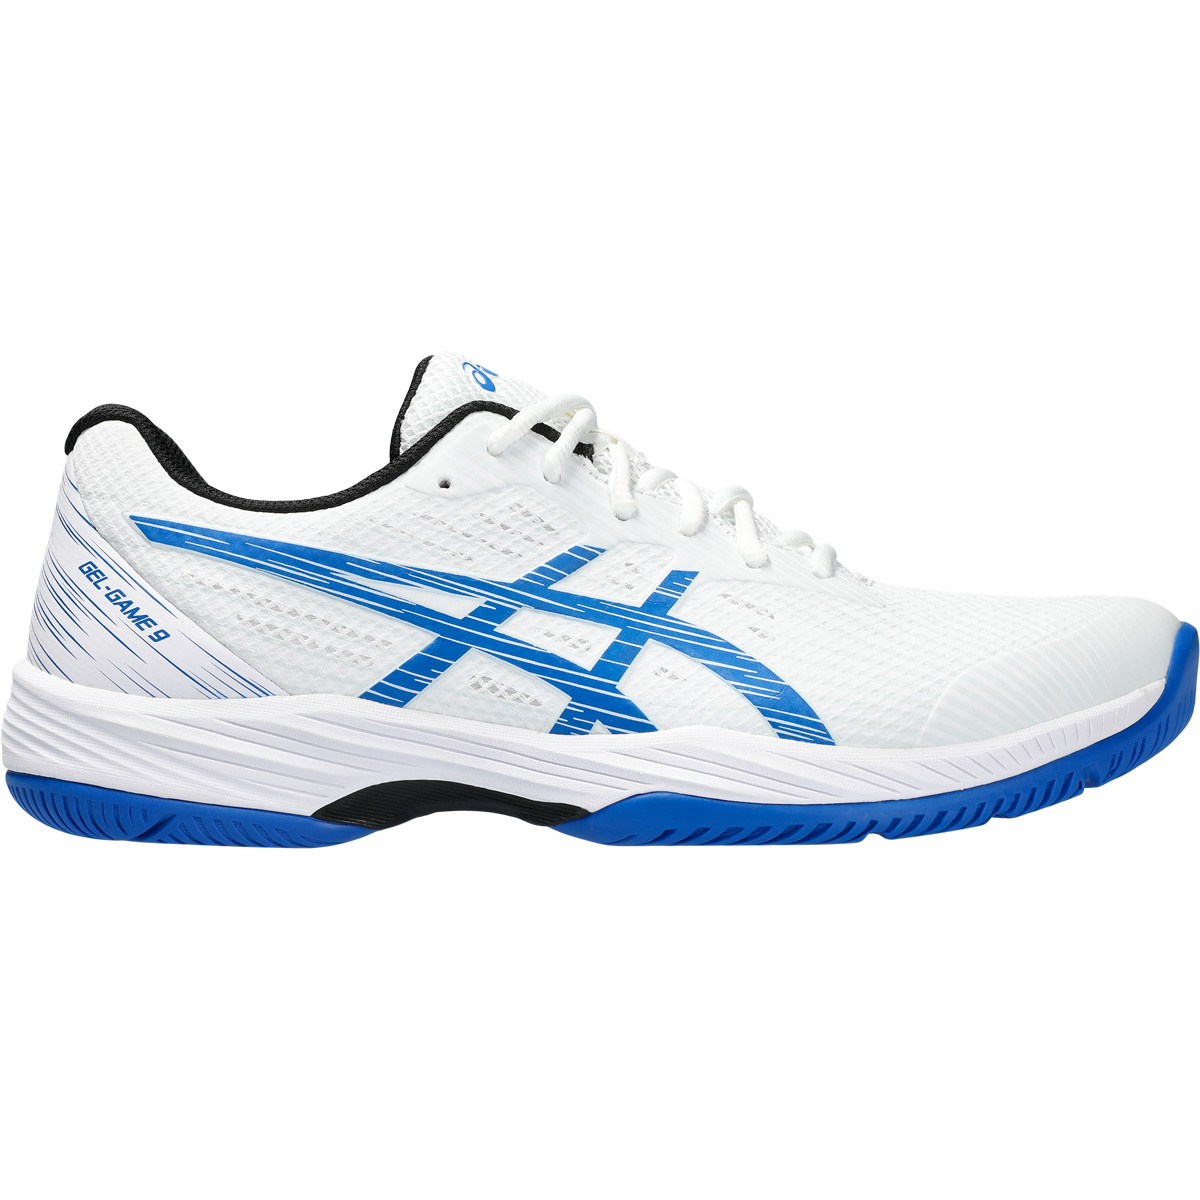 CHAUSSURES ASICS GEL-GAME 9 TOUTES SURFACES